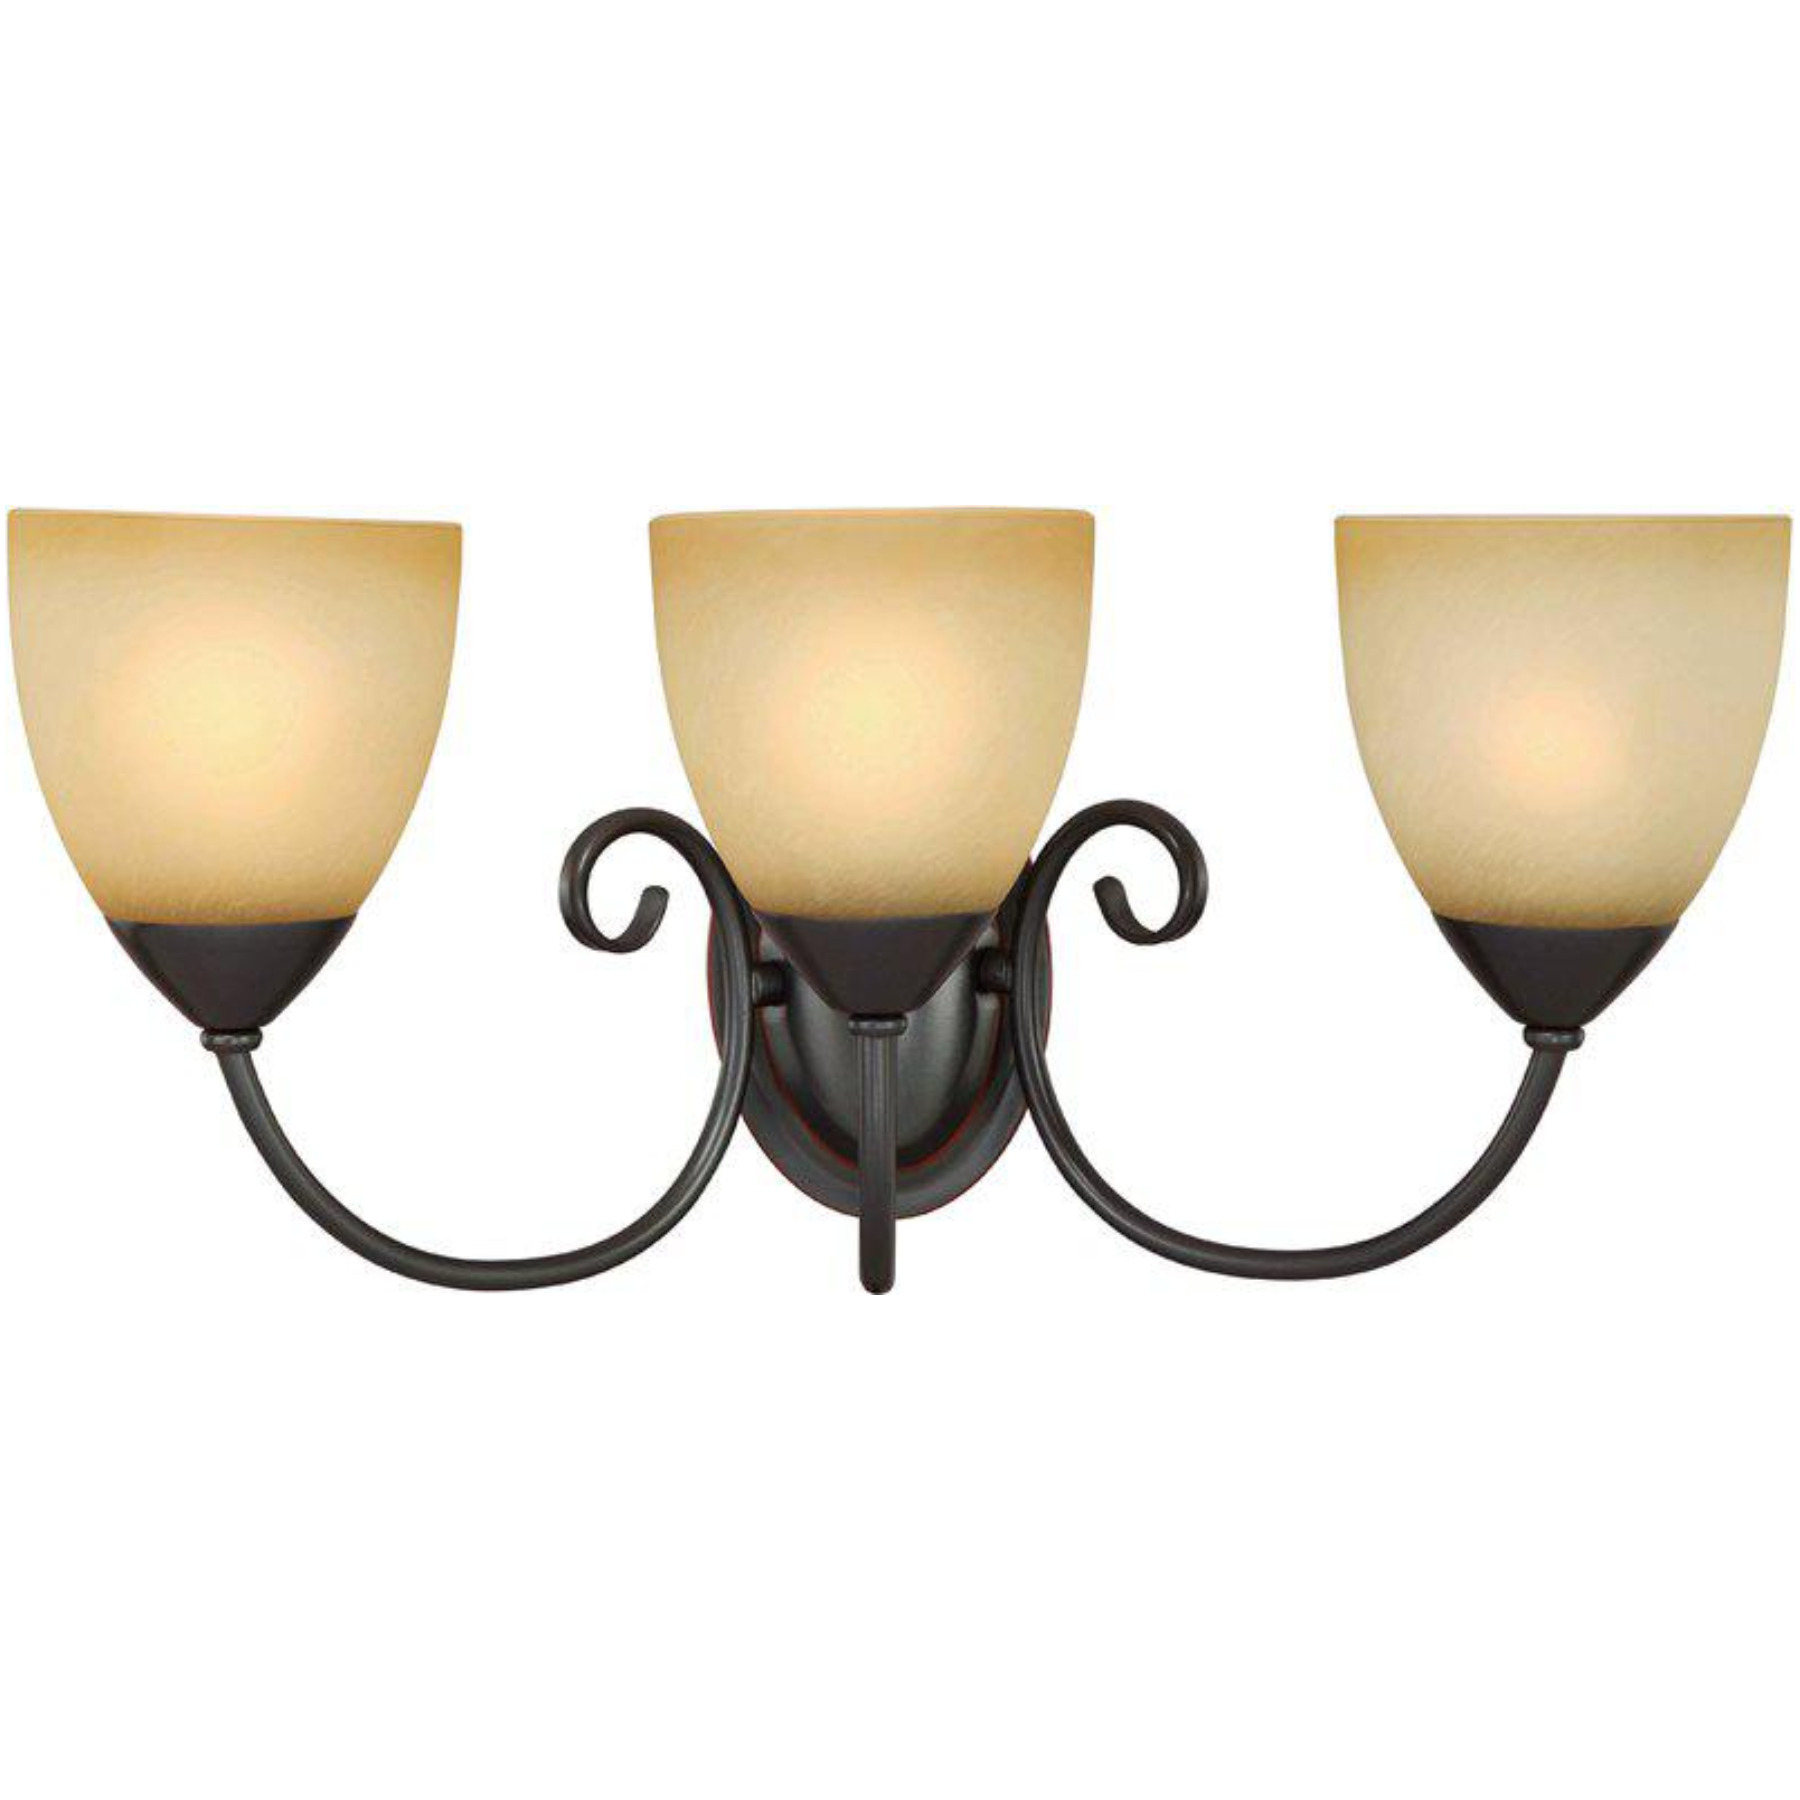 54-3850 Oil Rubbed Bronze 3 Light With Bath Light